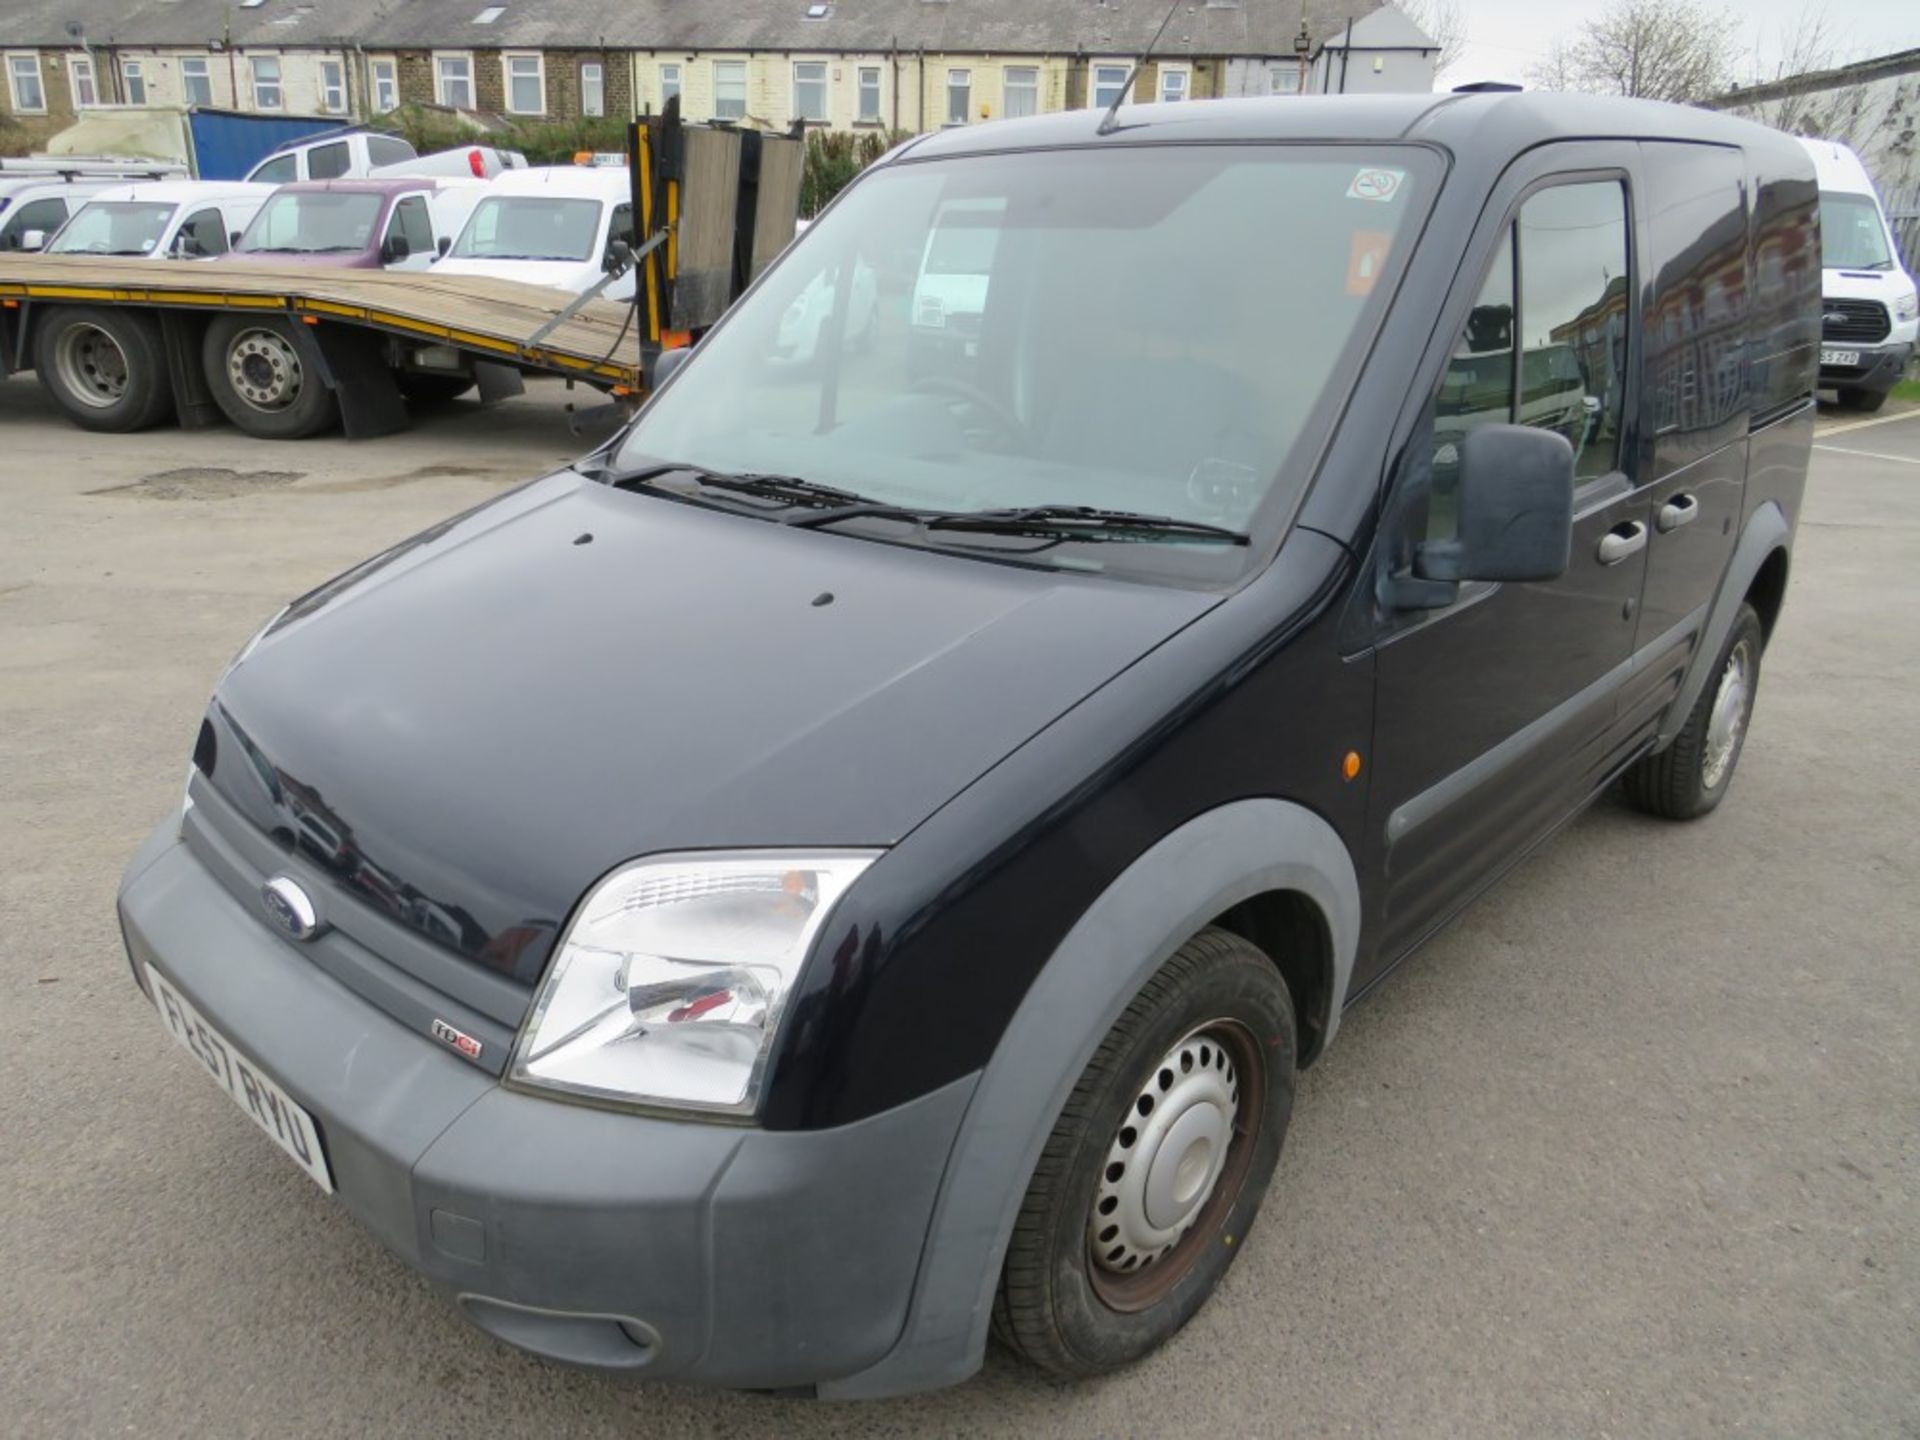 57 reg FORD TRANSIT CONNECT T220 LX90 (DIRECT COUNCIL) 1ST REG 09/07, TEST 09/21, 43873M - Image 2 of 7